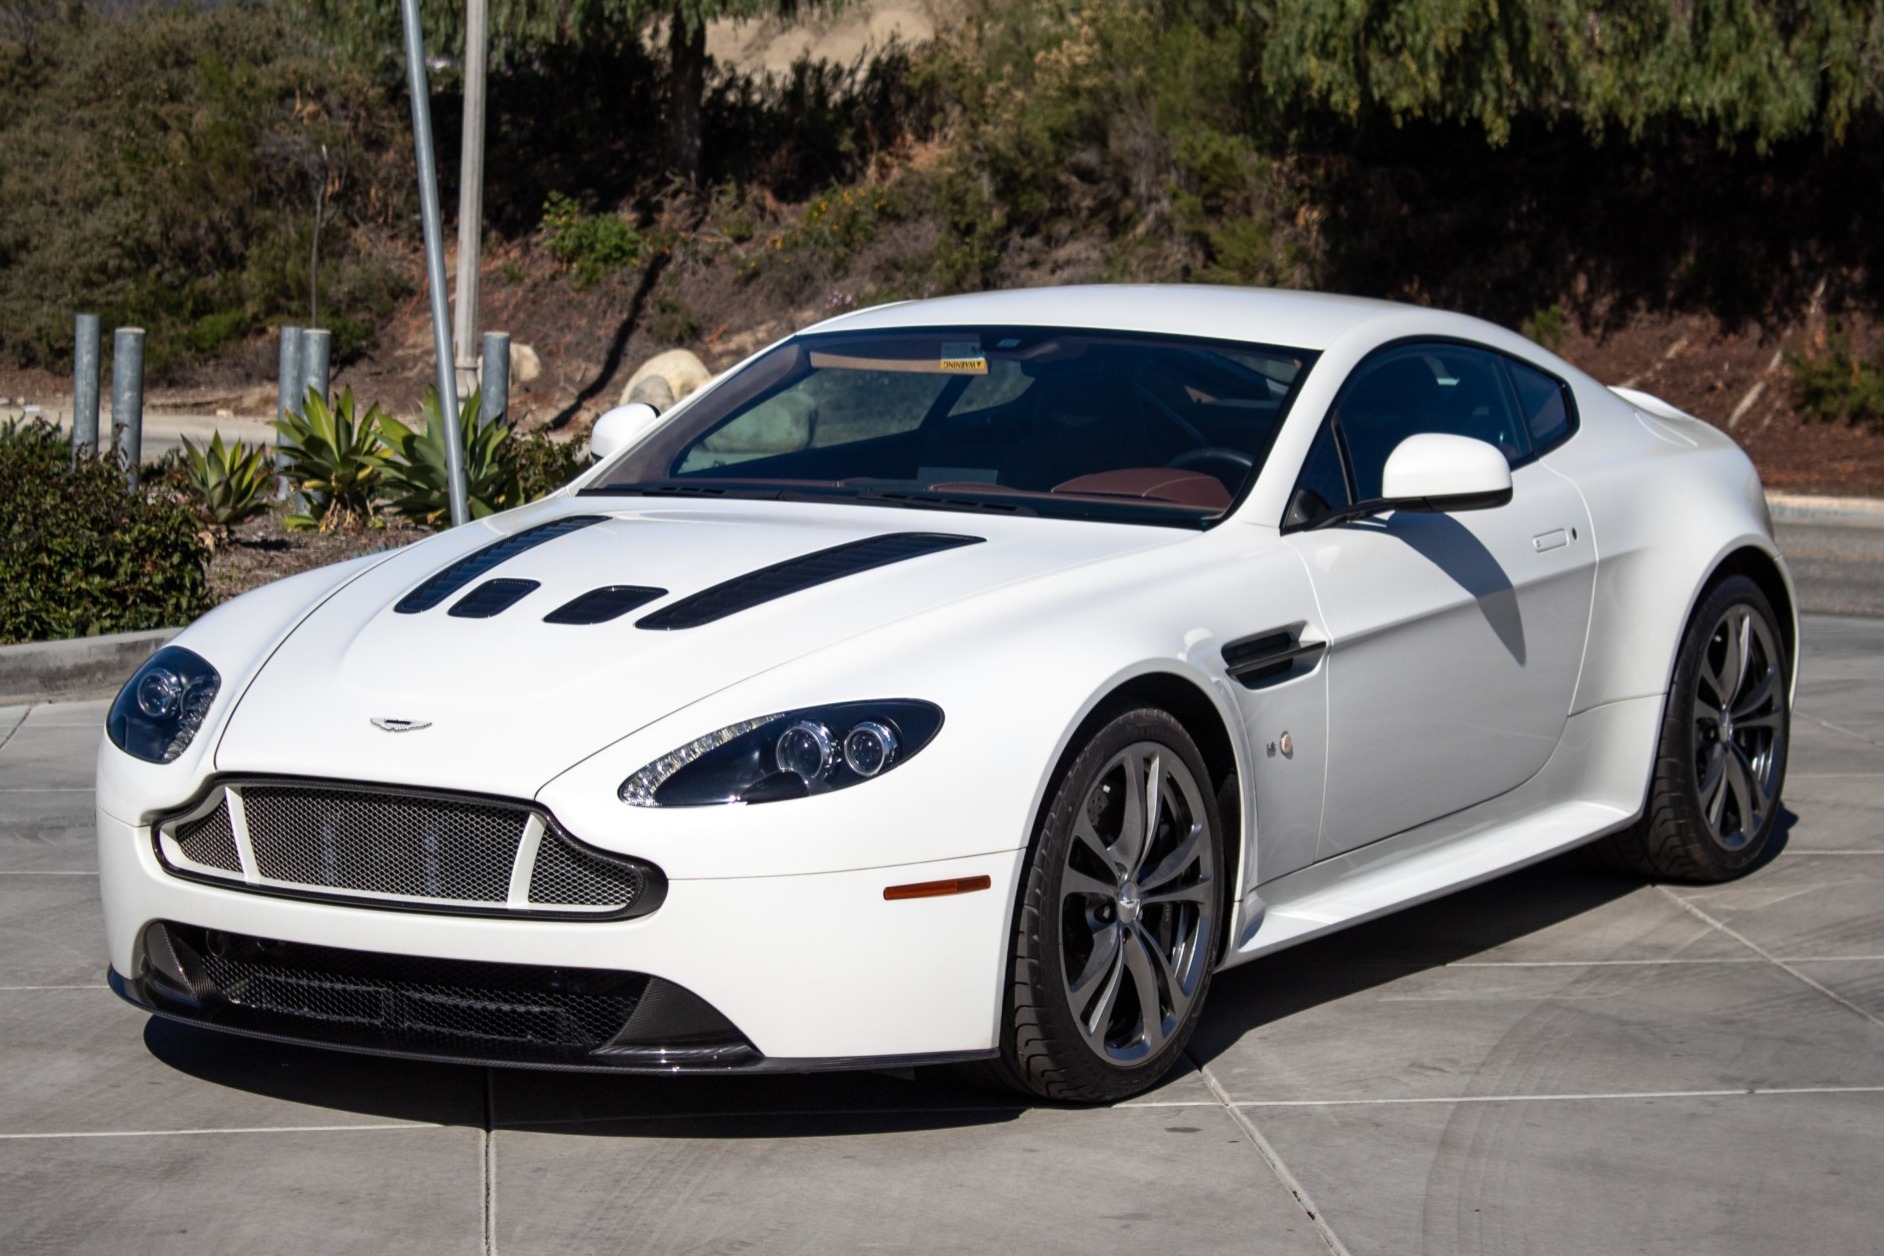 167-Mile 2016 Aston Martin V12 Vantage S for sale on BaT Auctions - closed  on February 26, 2020 (Lot #28,400) | Bring a Trailer